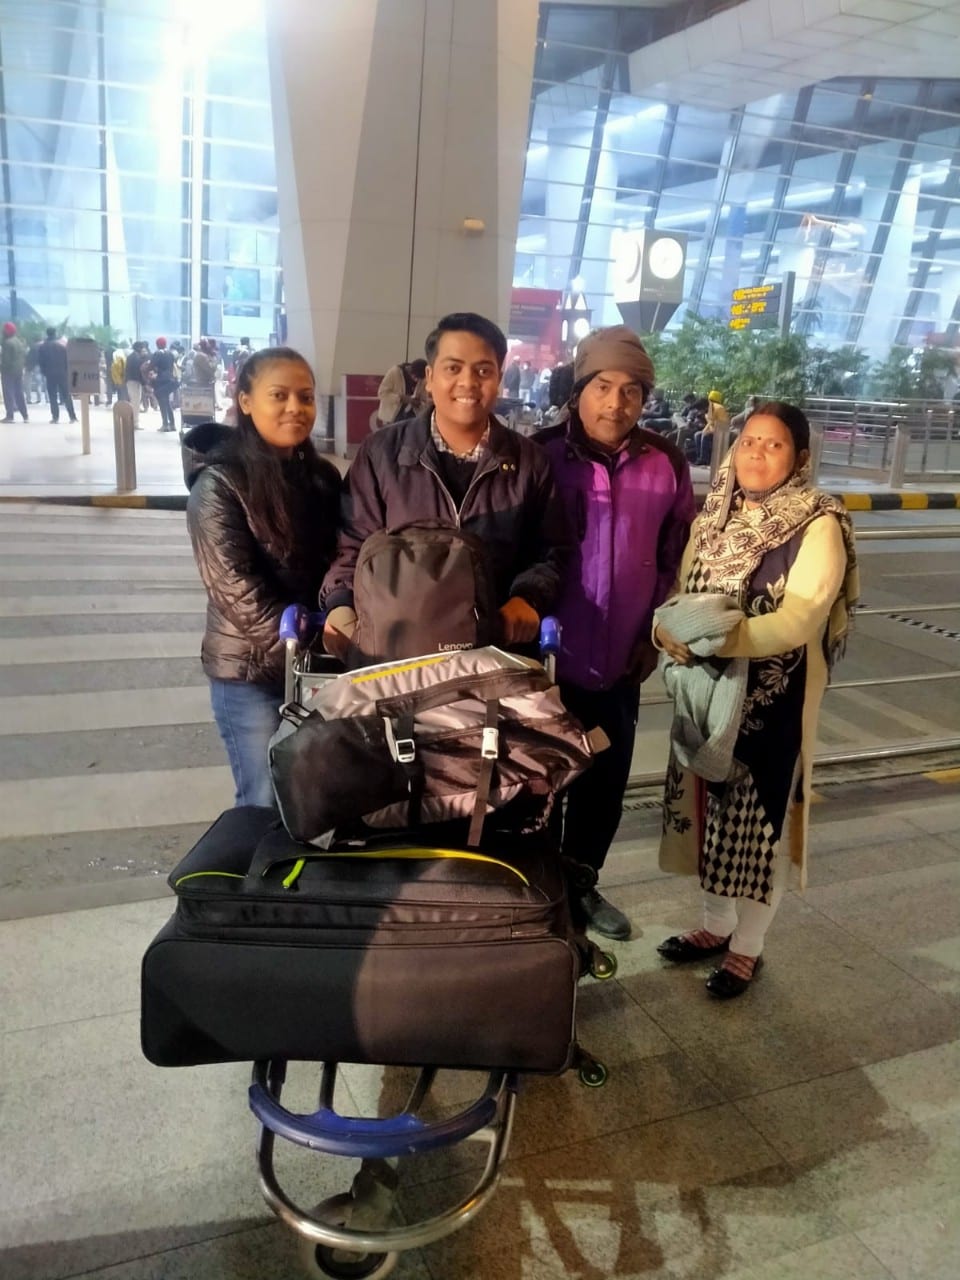 Tushar Joshi and his family carrying luggages, leaving India